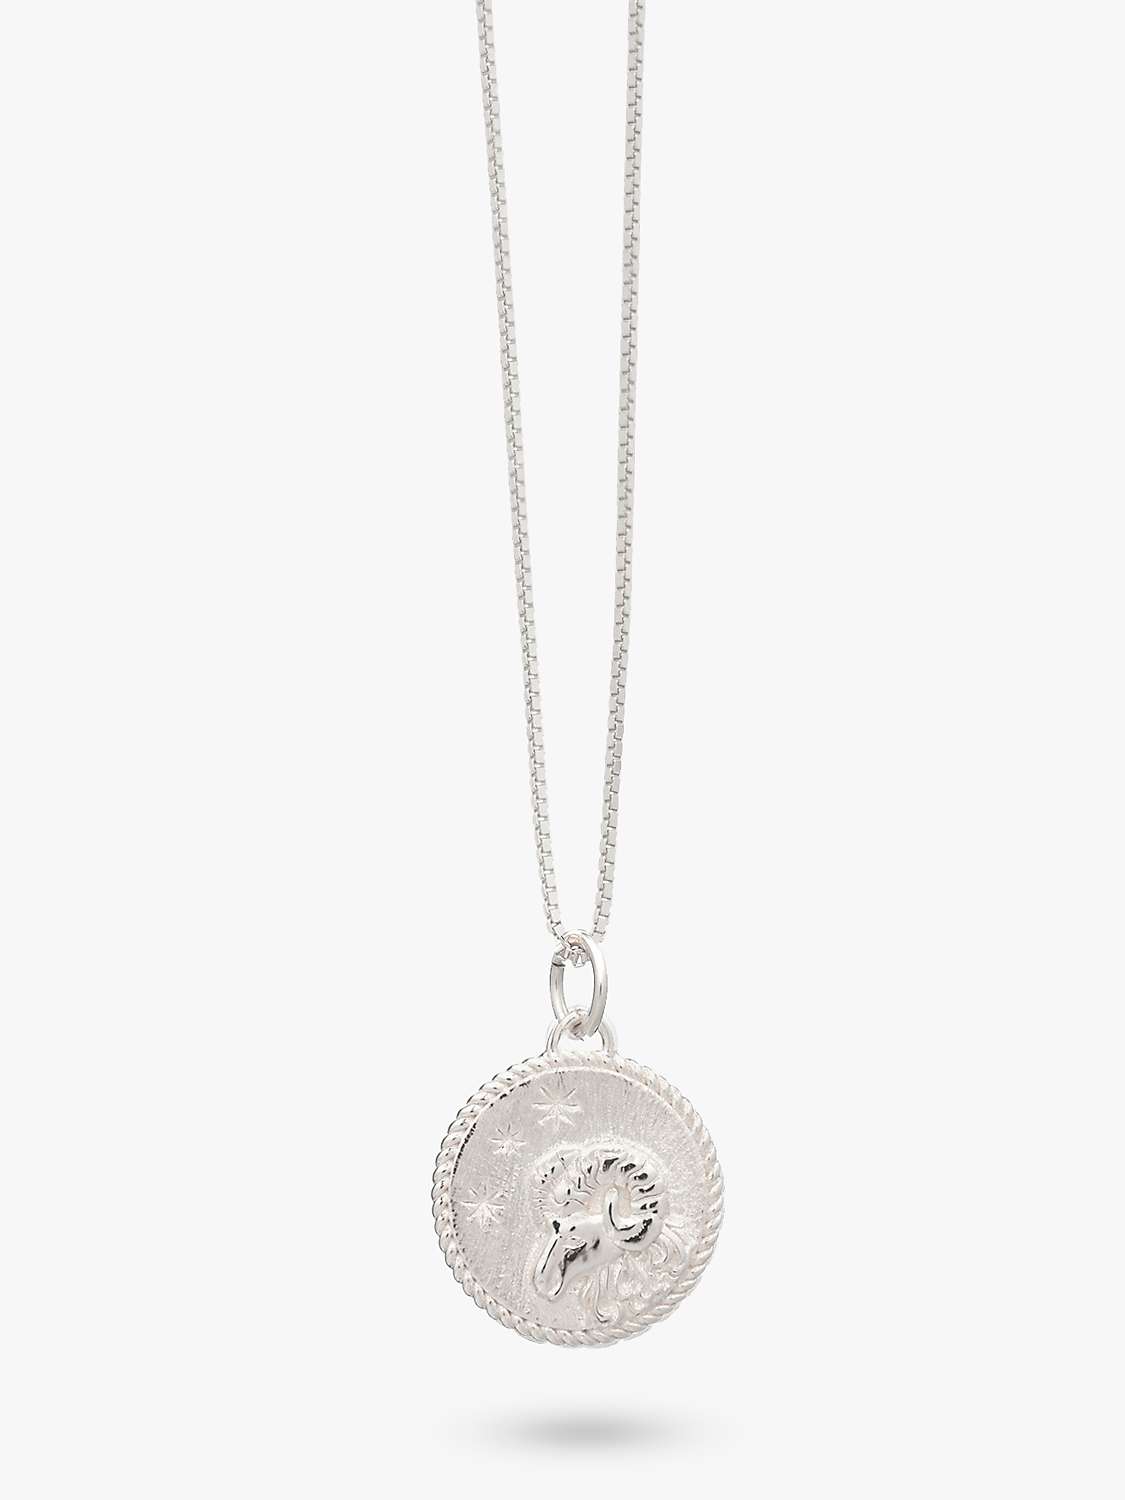 Buy Rachel Jackson London Personalised Zodiac Art Coin Necklace, Silver Online at johnlewis.com